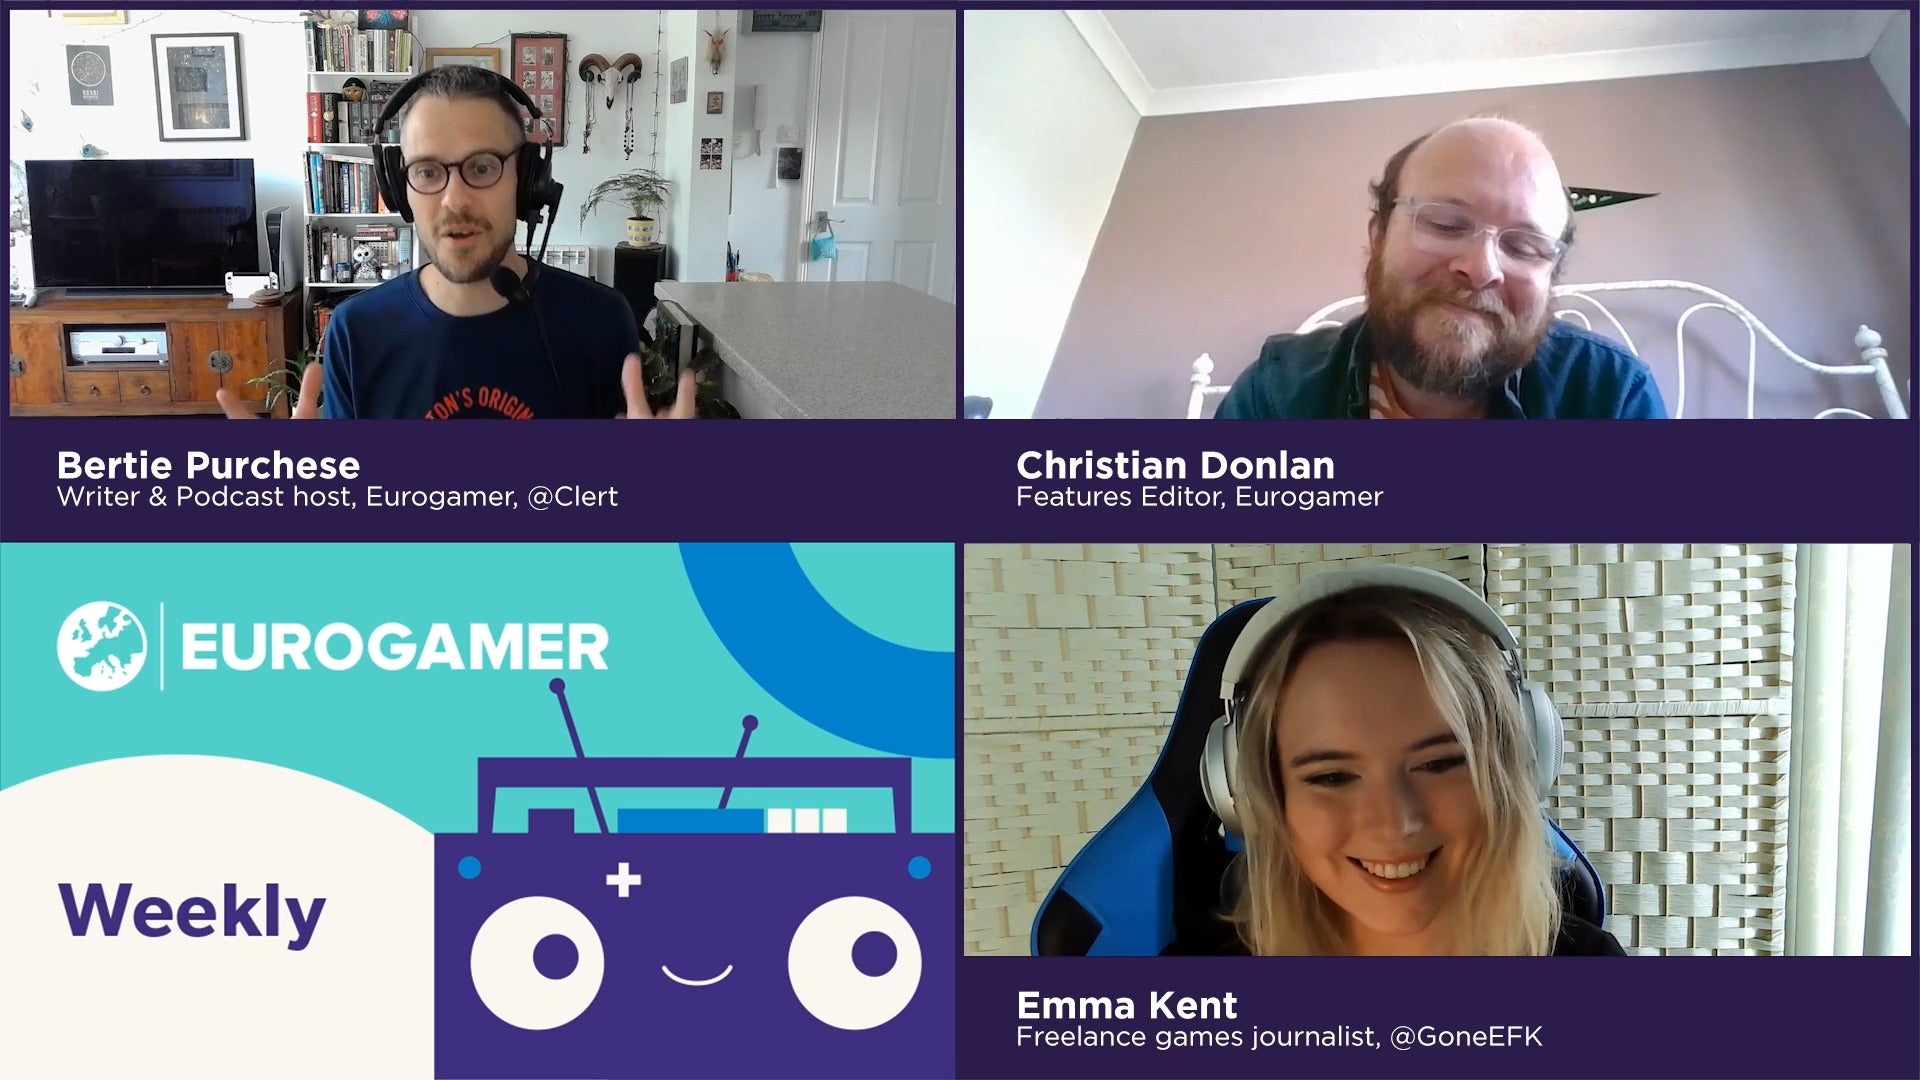 A still from a podcast call. Bertie, Christian and Emma Kent all smile over some joke or other.